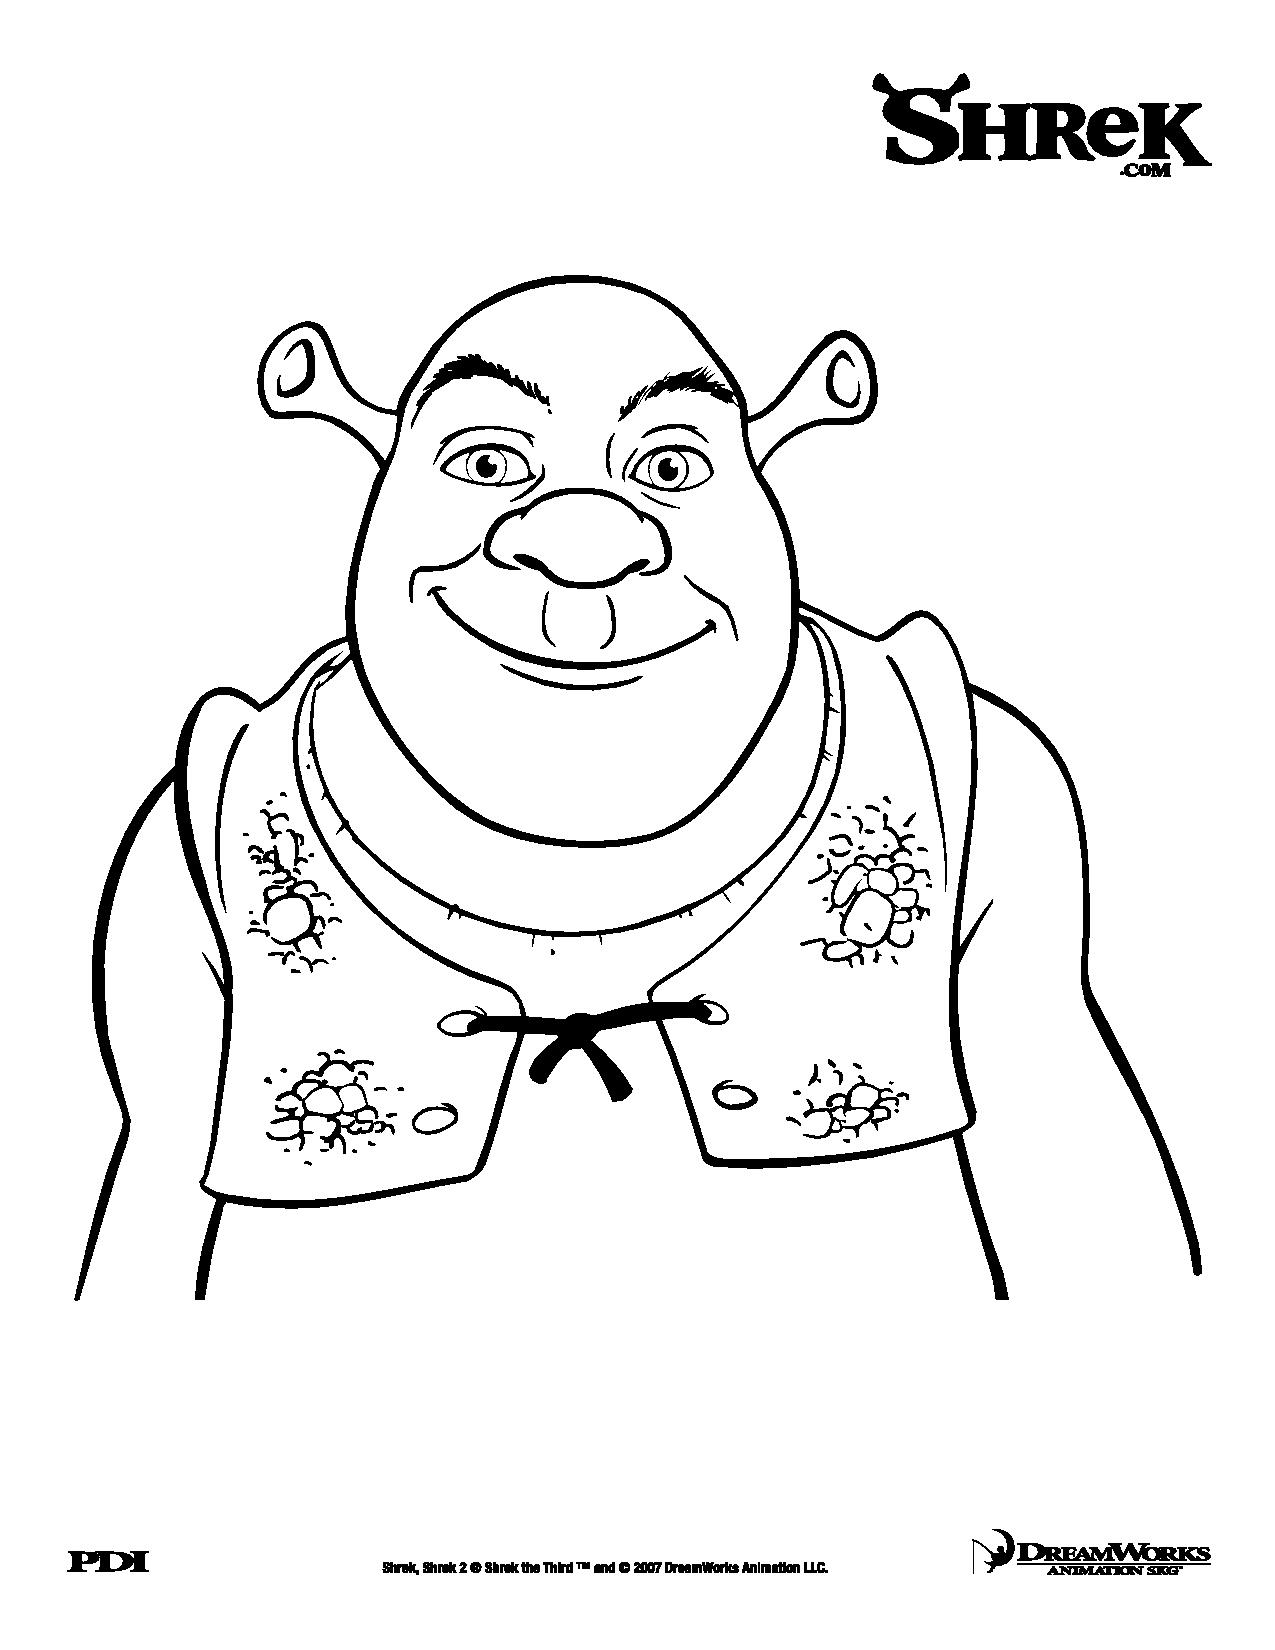 ogre-baby-shrek-coloring-pages